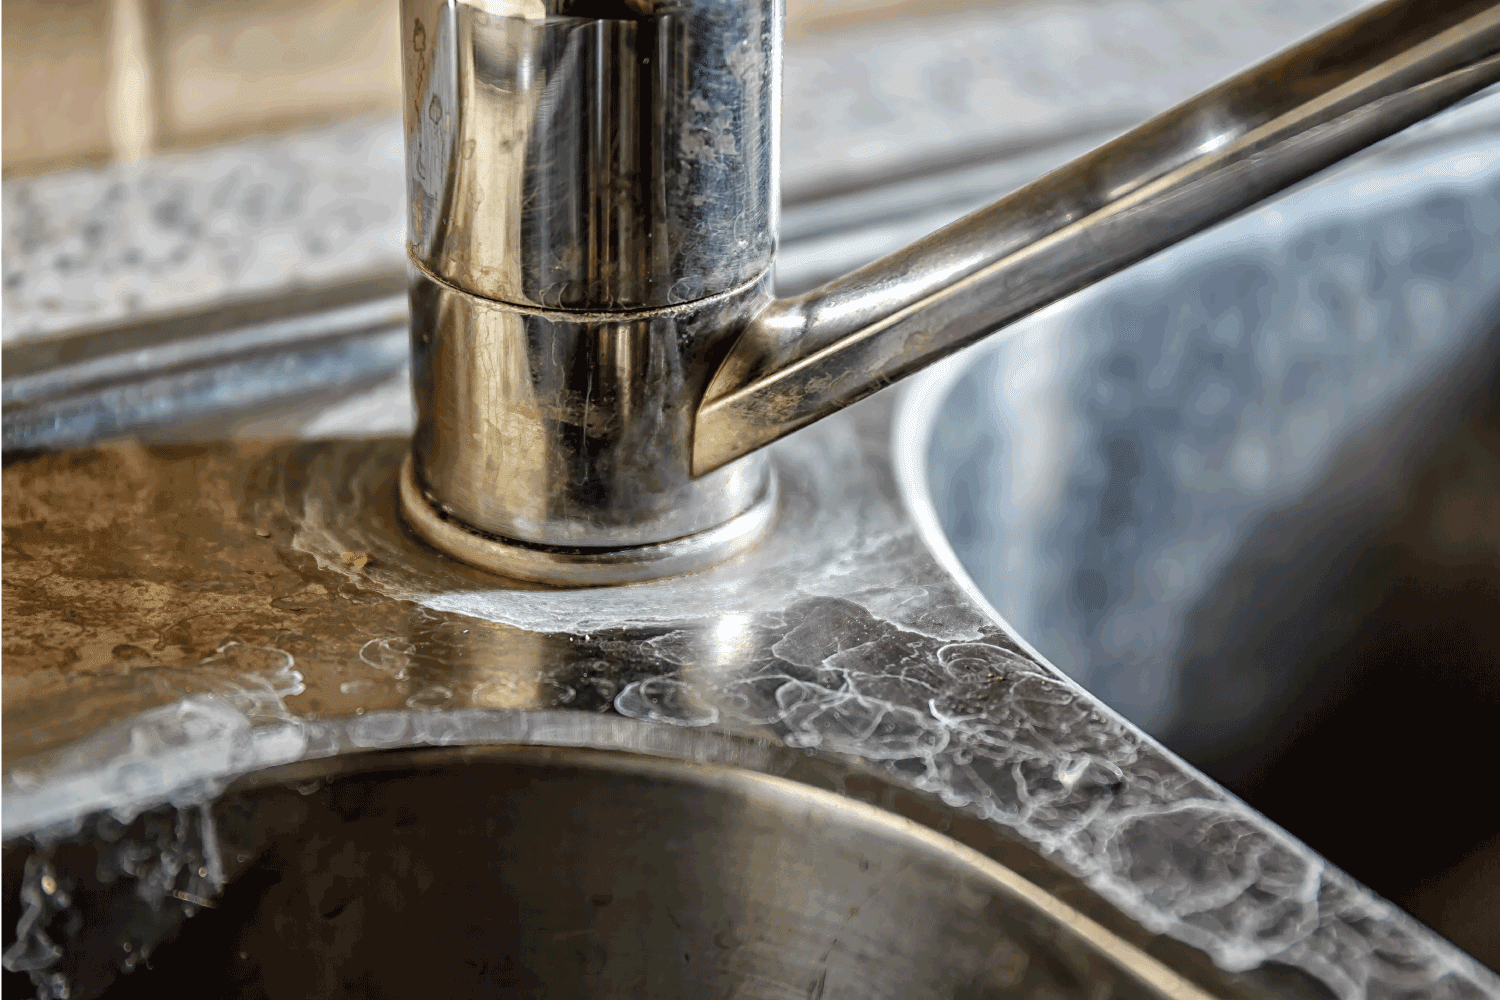  kitchen tap and sink with hard water calcification.